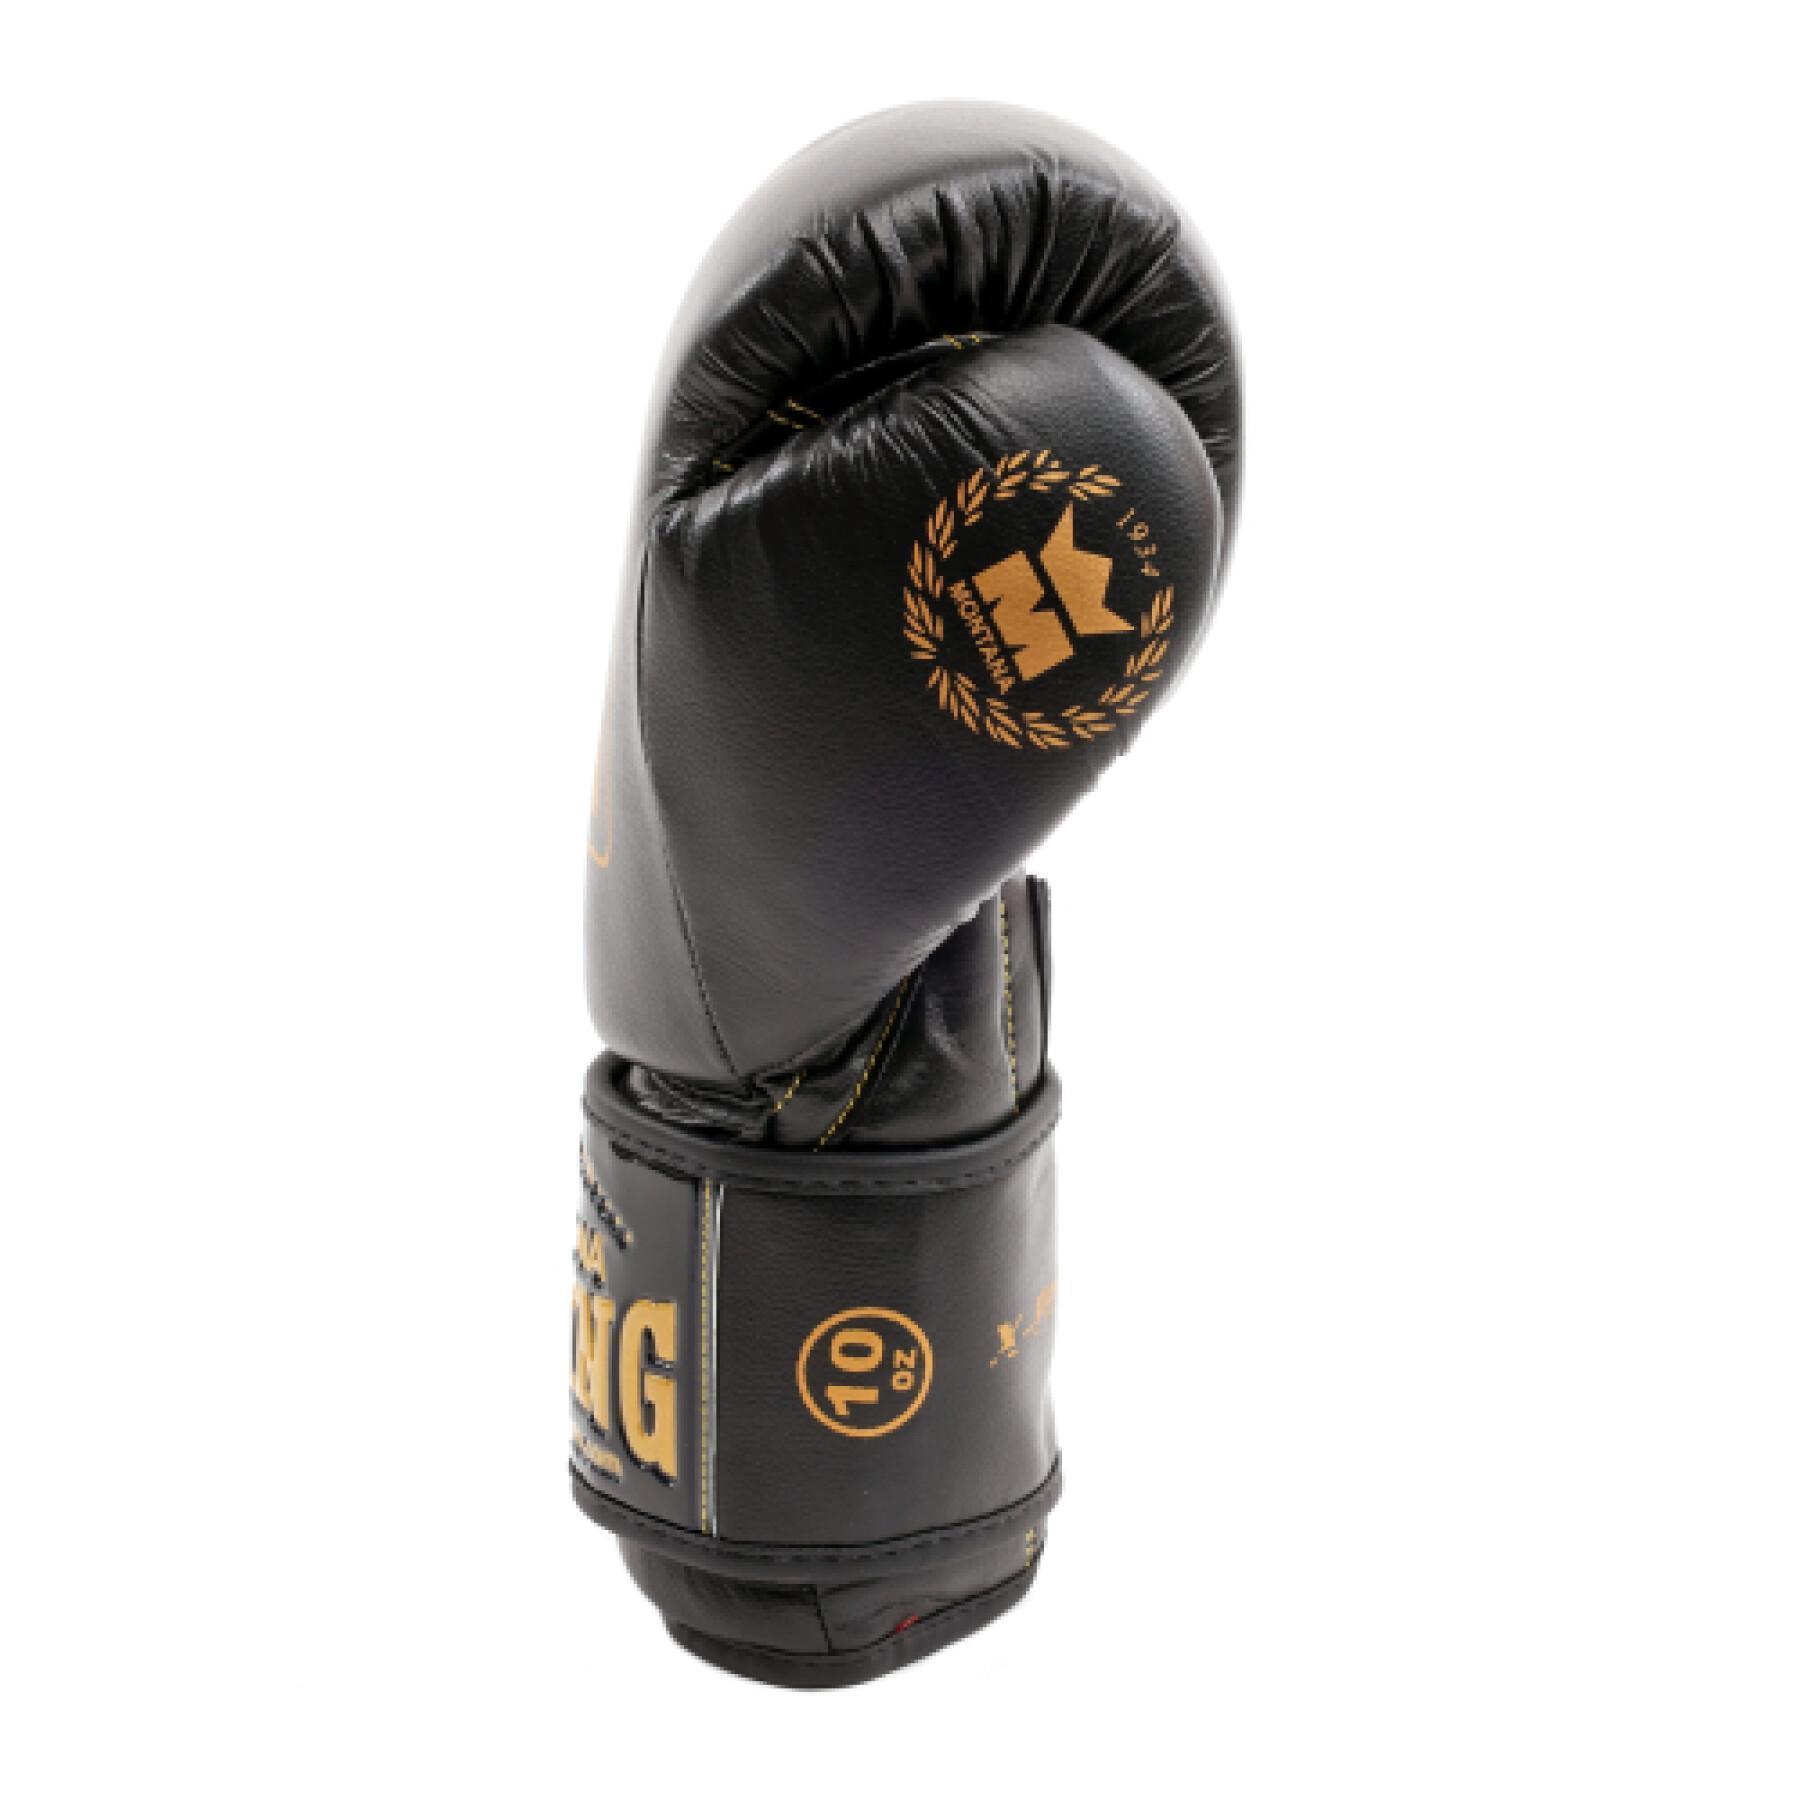 Boxing gloves Montana x-perience